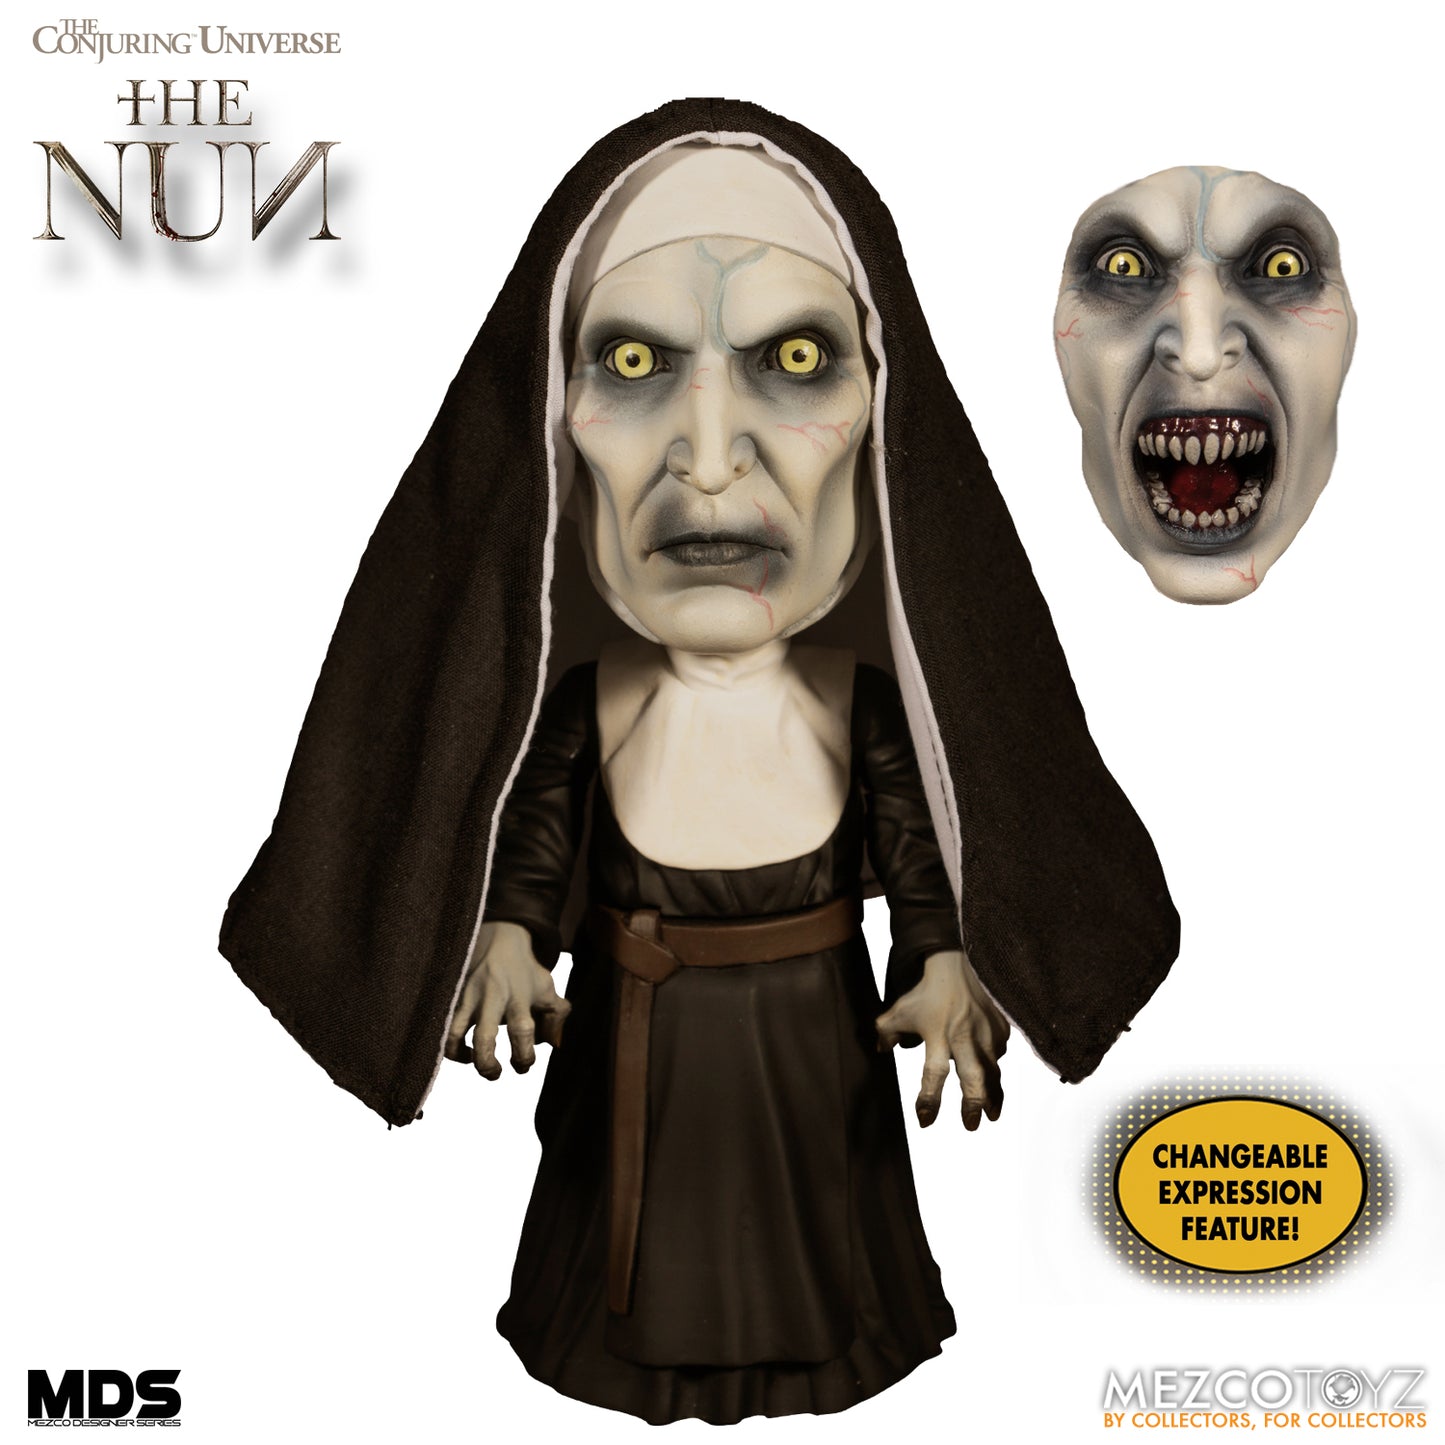 THE NUN 6 INCH MDS FIGURE THE CONJURING UNIVERSE